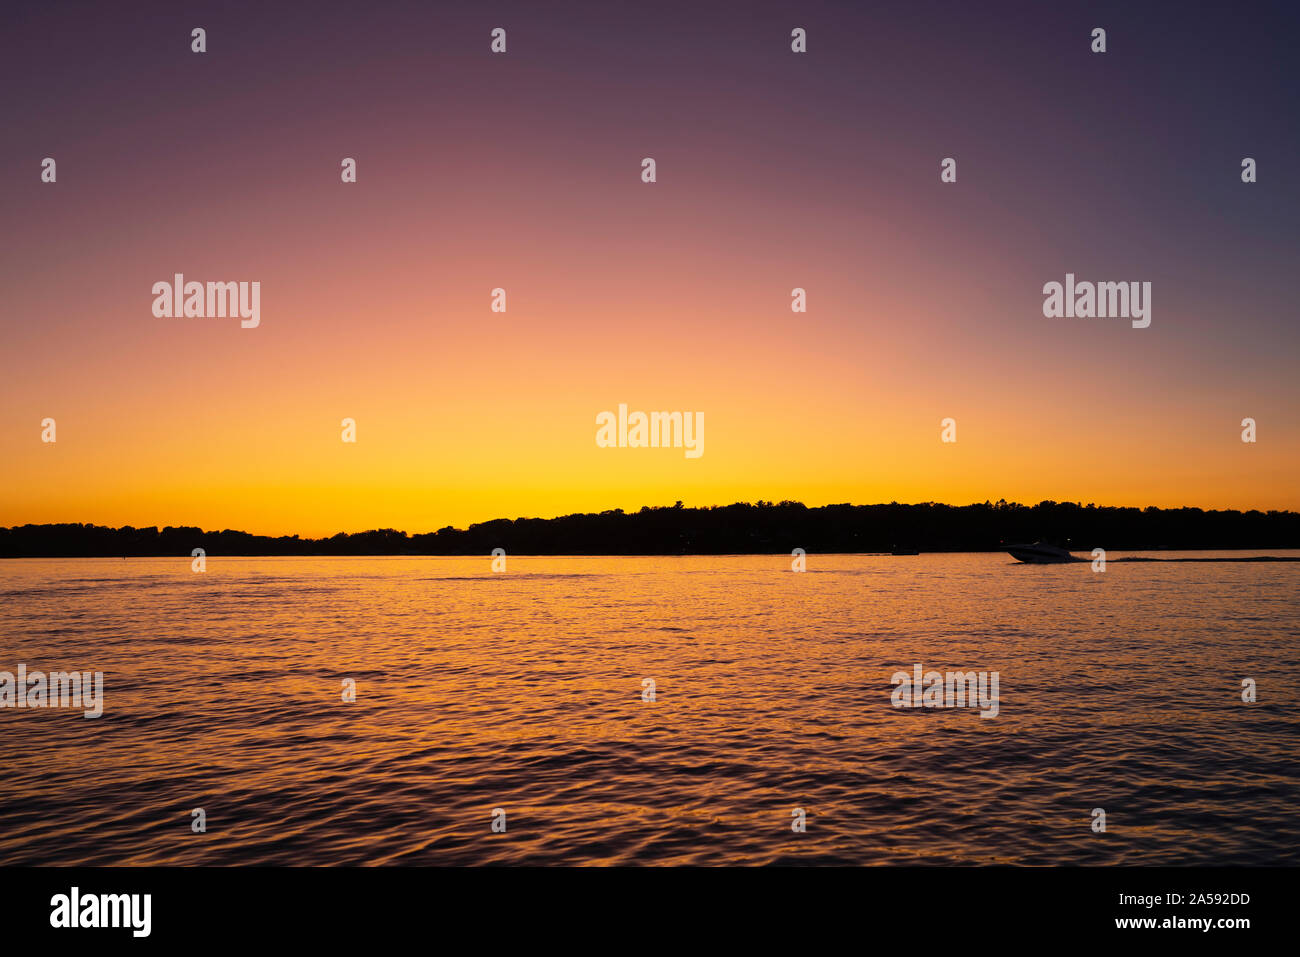 Minnetonka mn hi-res stock photography and images - Alamy